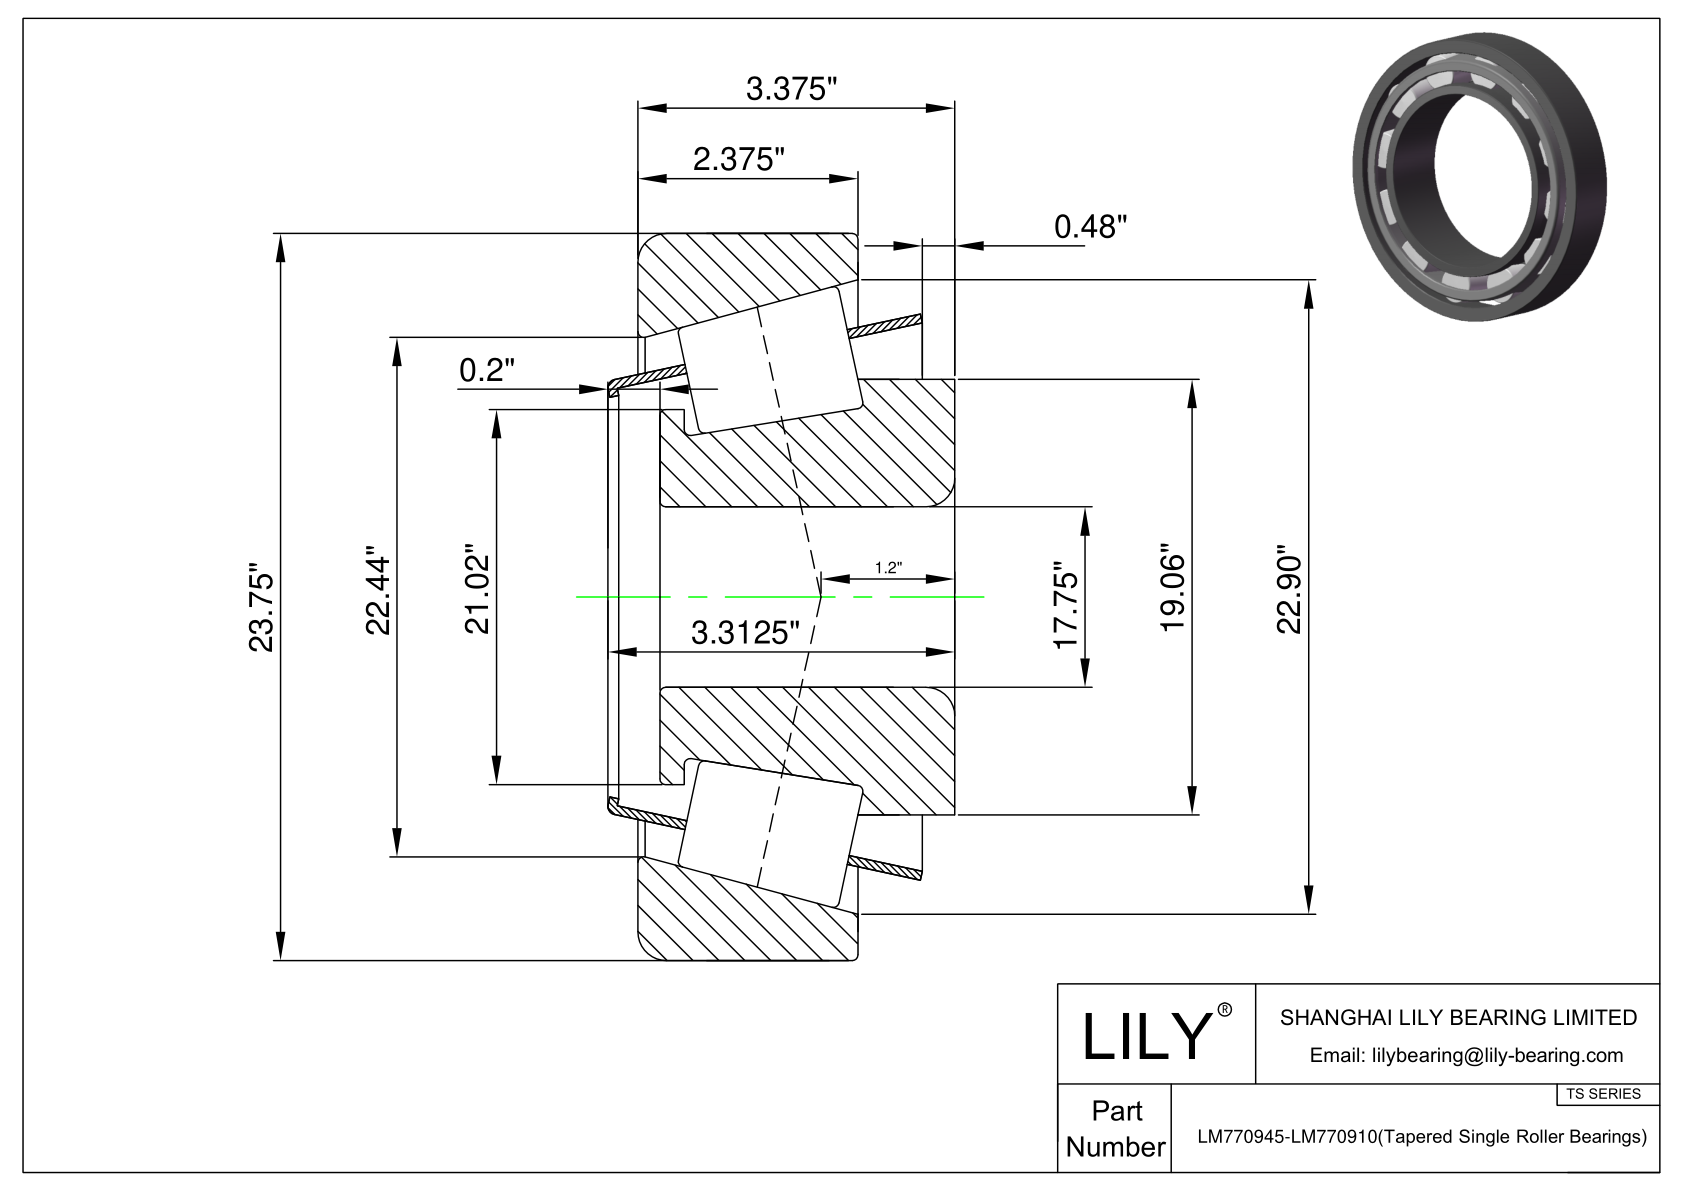 LM770945-LM770910 TS (Tapered Single Roller Bearings) (Imperial) cad drawing